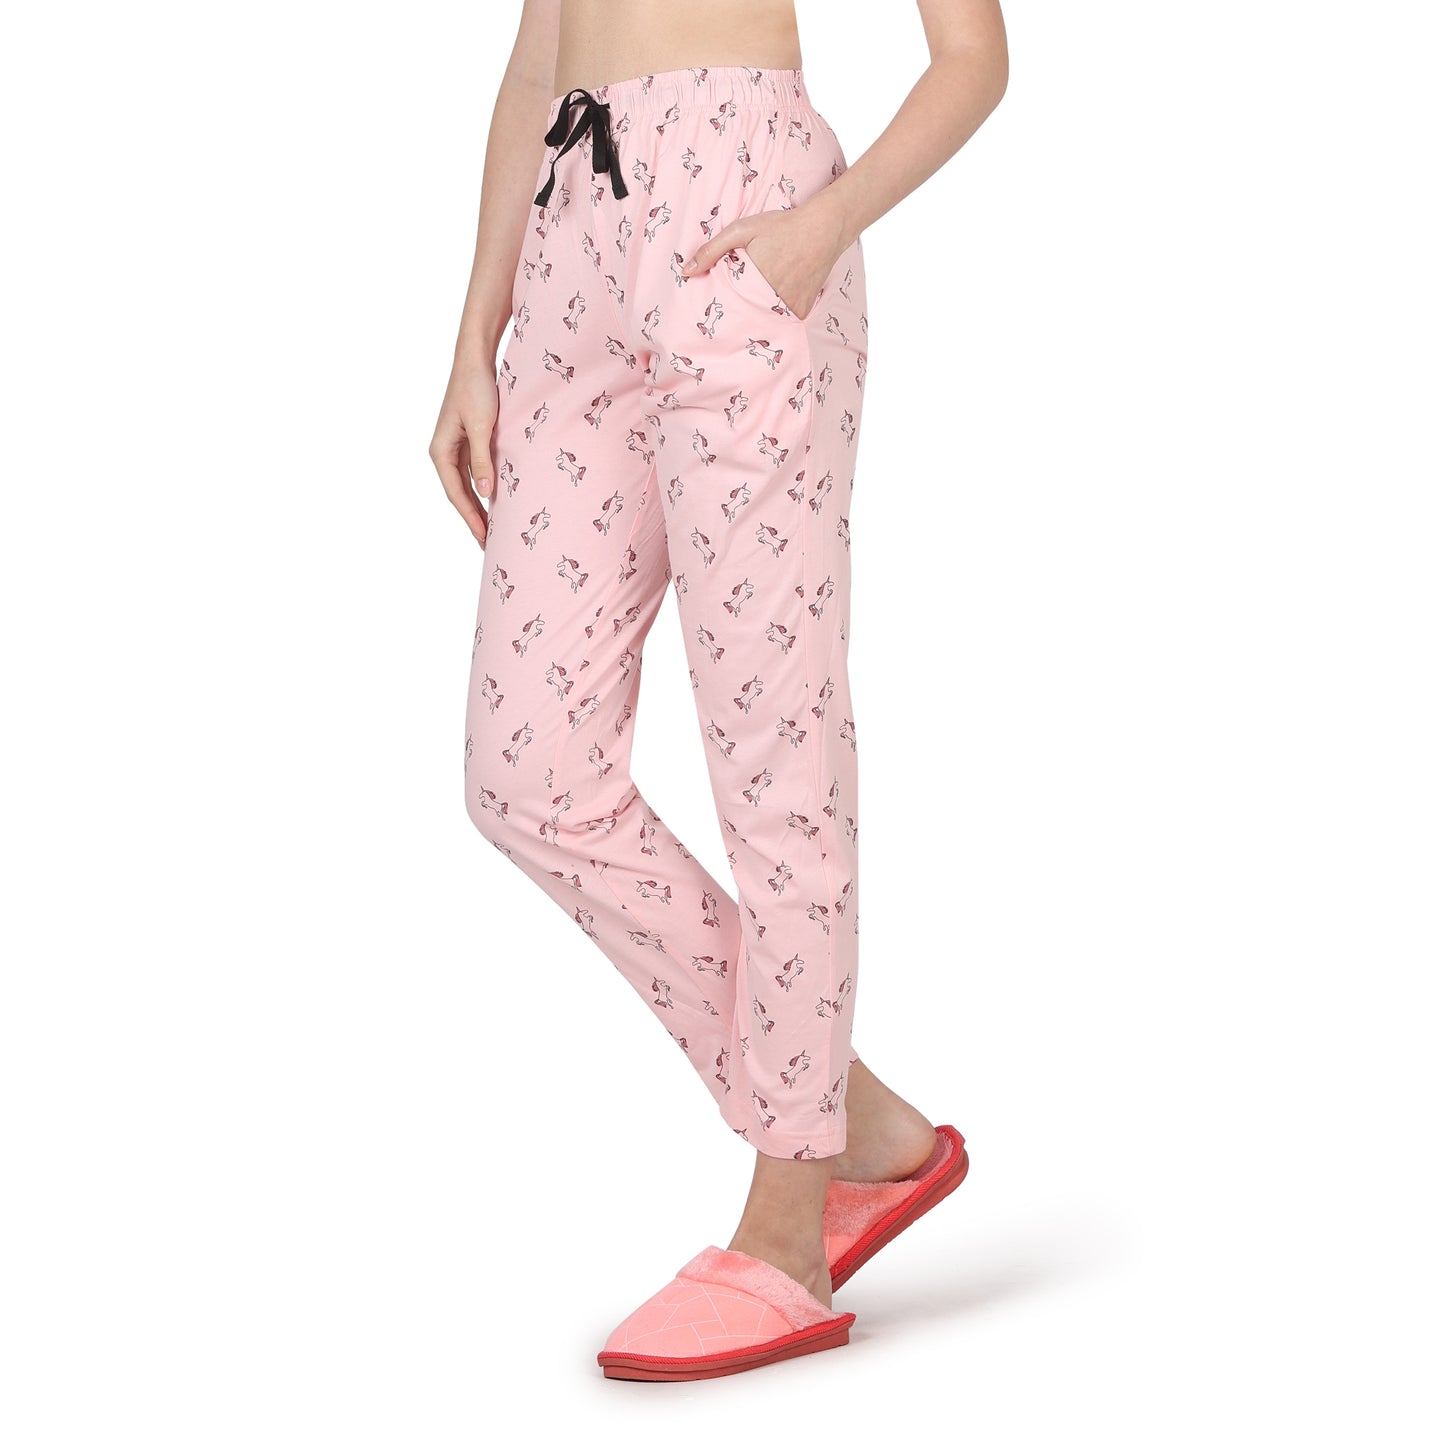 Eazy Women's Printed Lower - Pack of 2 - Black & Light Pink